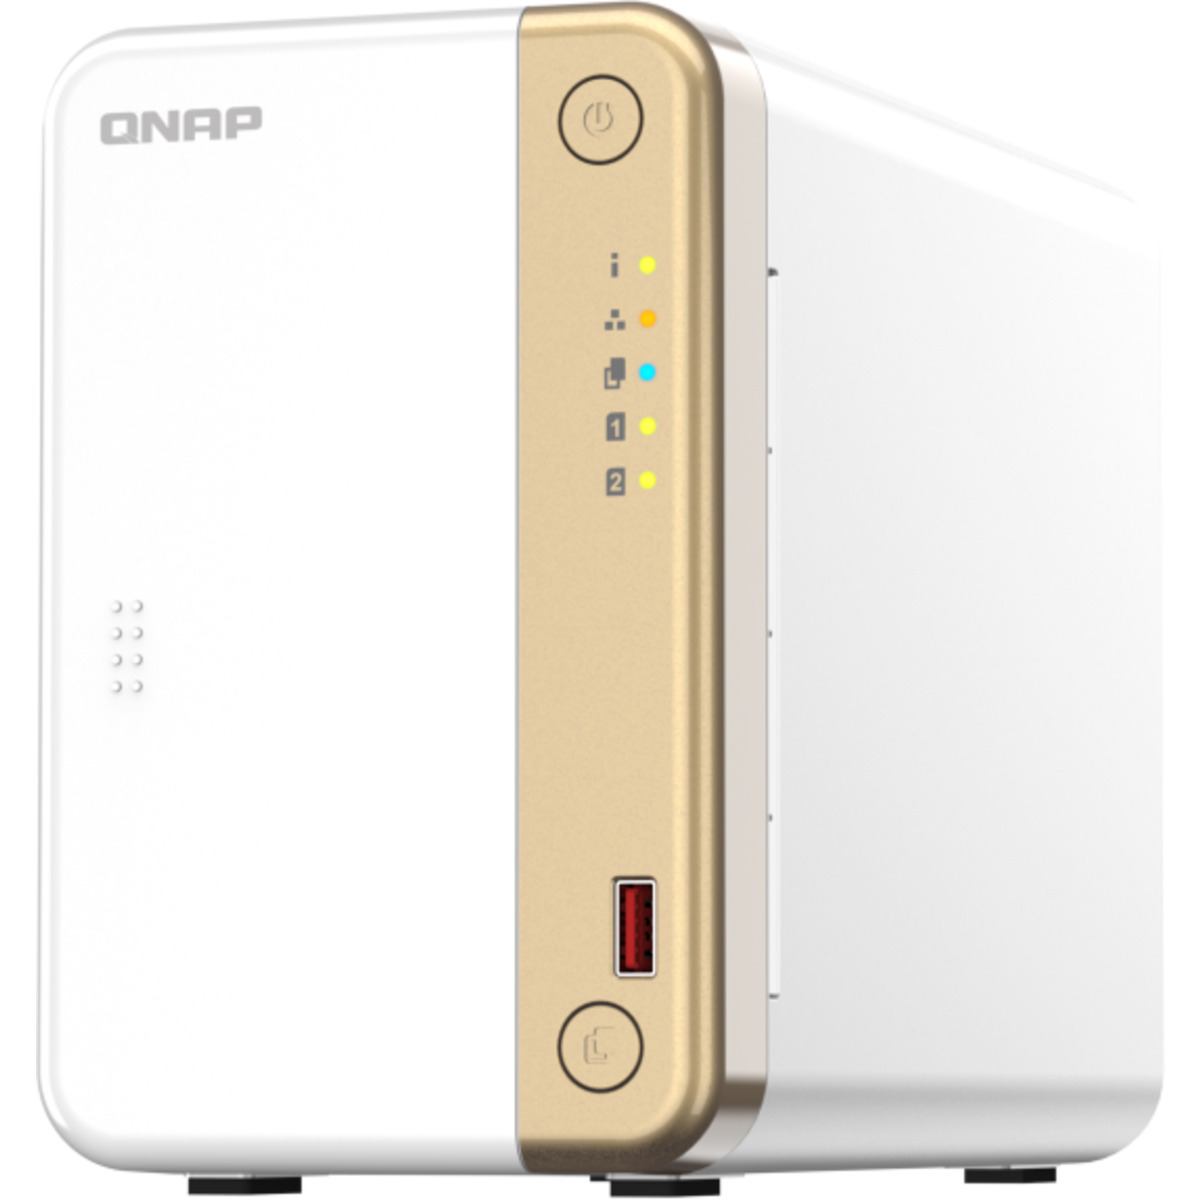 QNAP TS-262 44tb 2-Bay Desktop Personal / Basic Home / Small Office NAS - Network Attached Storage Device 2x22tb Seagate IronWolf Pro ST22000NT001 3.5 7200rpm SATA 6Gb/s HDD NAS Class Drives Installed - Burn-In Tested TS-262